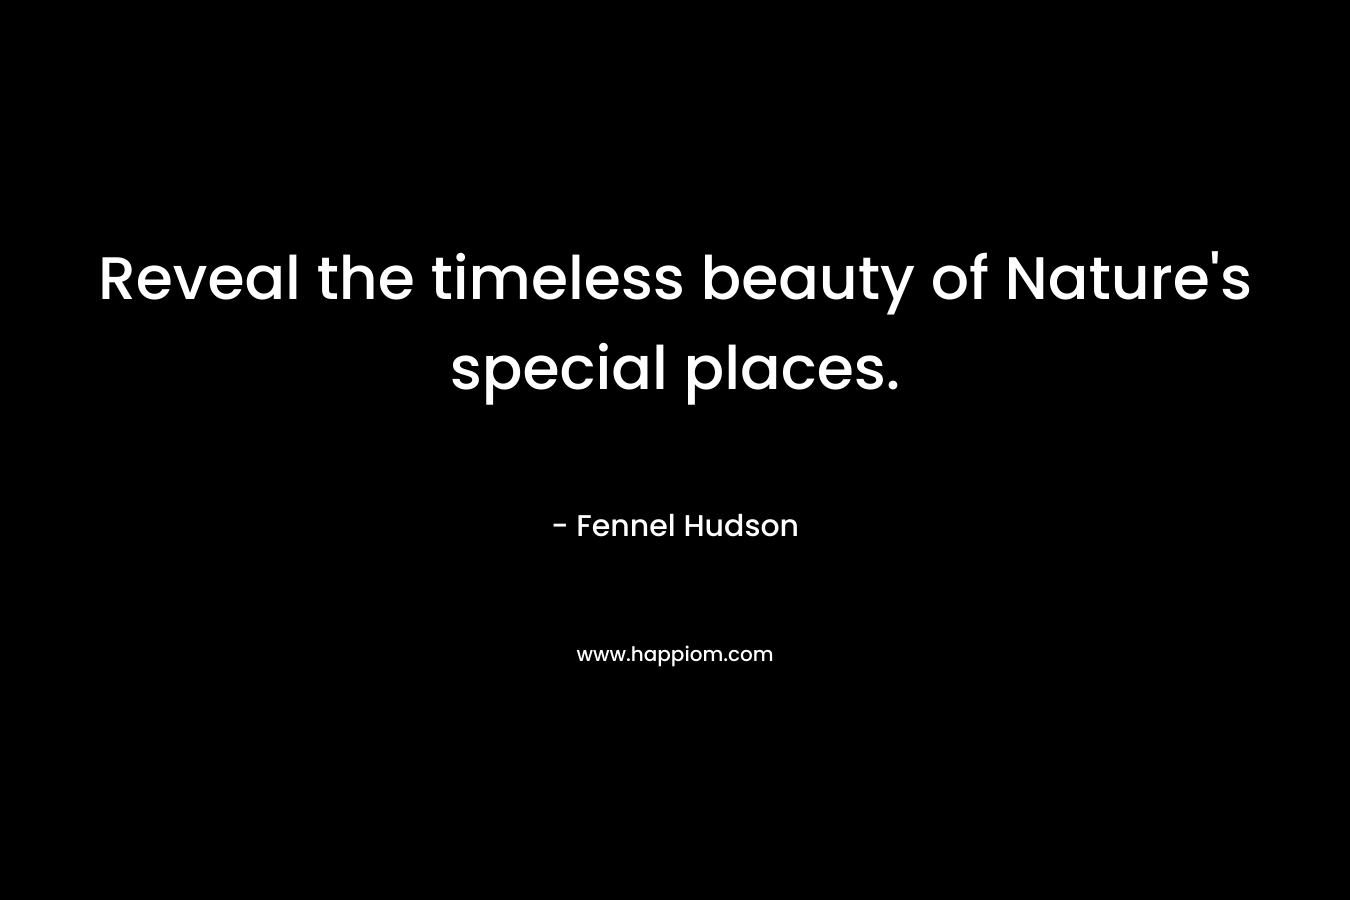 Reveal the timeless beauty of Nature's special places.